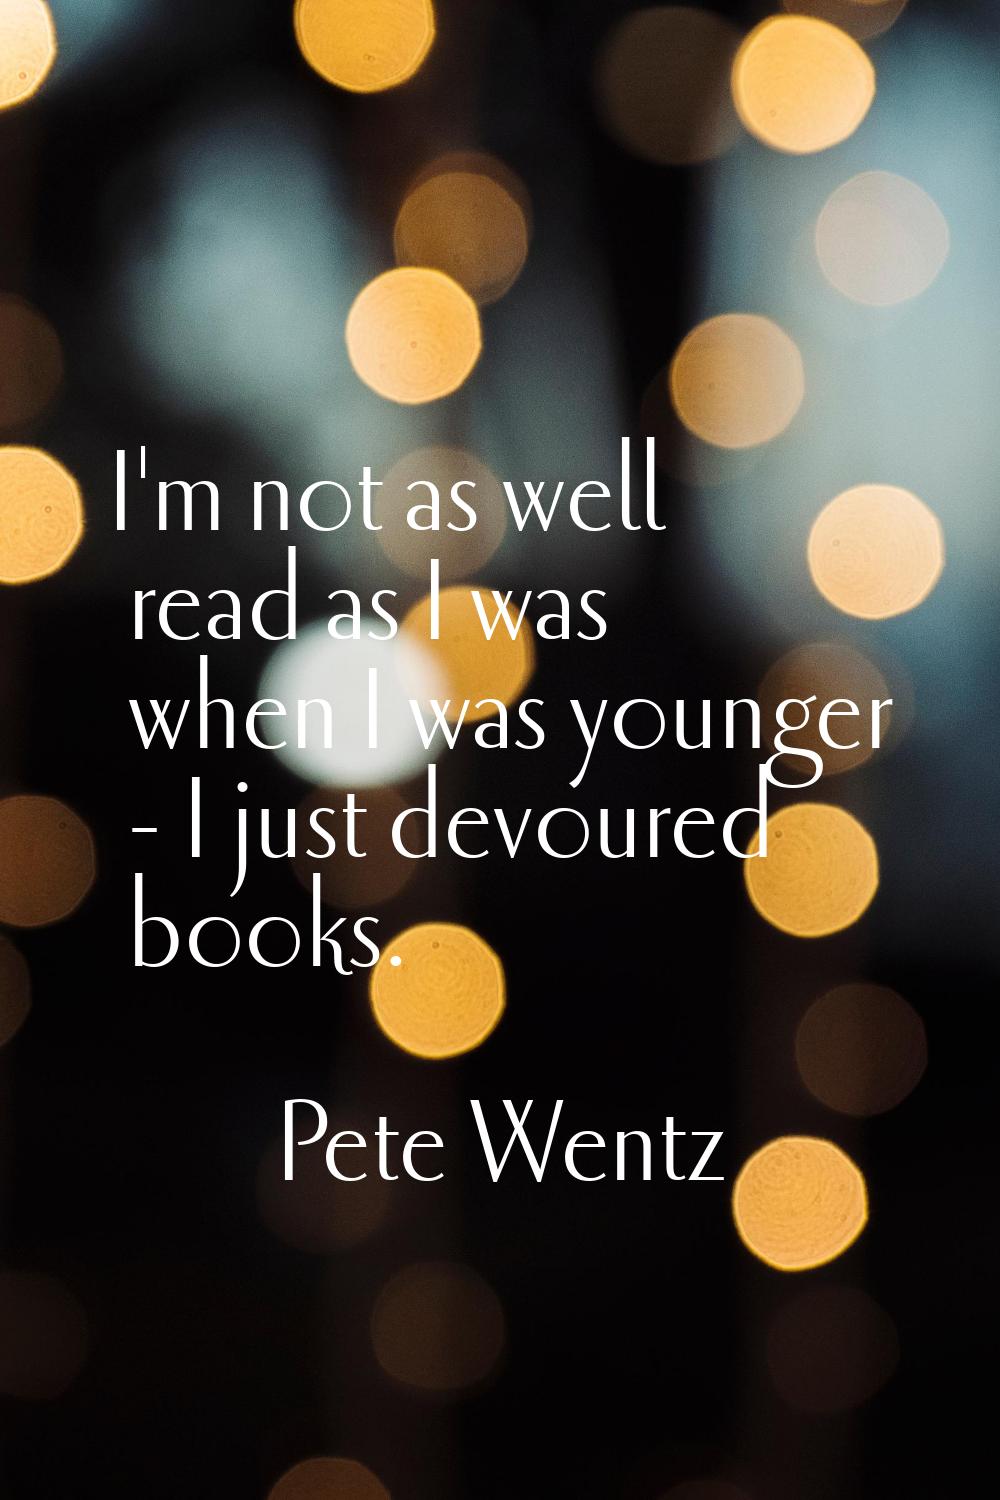 I'm not as well read as I was when I was younger - I just devoured books.